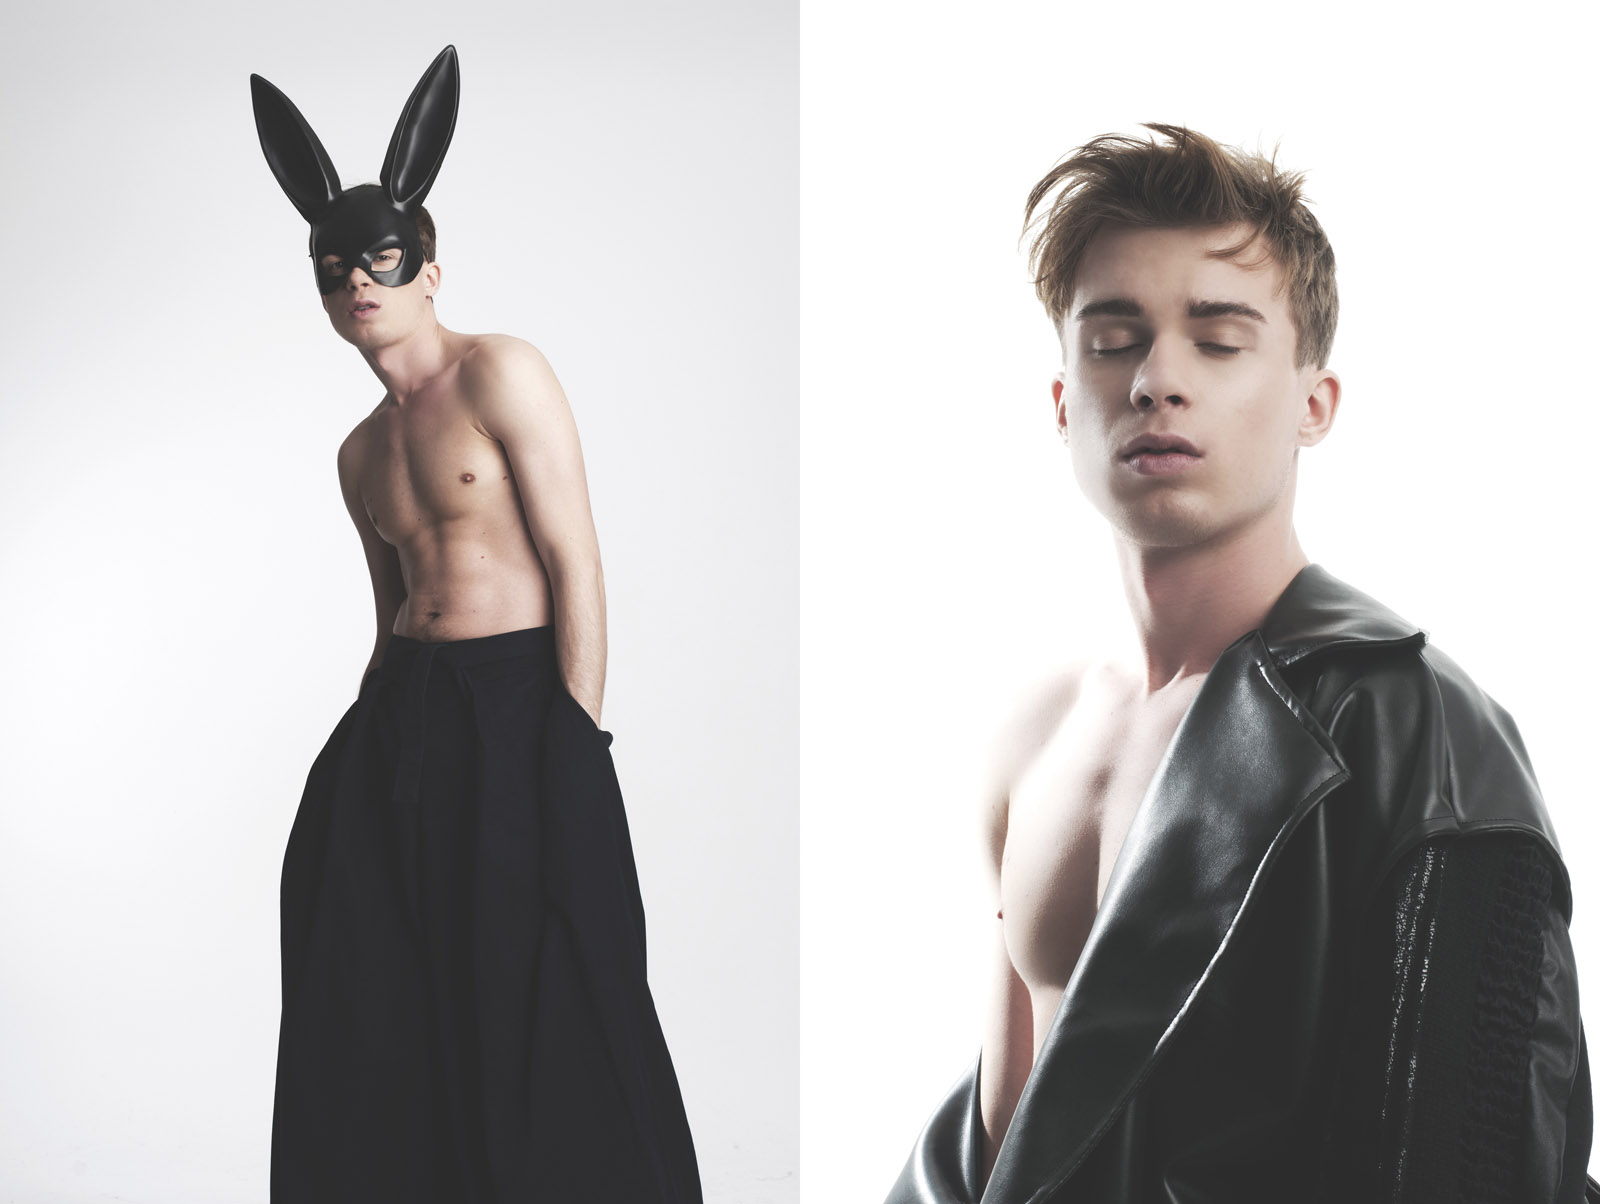 FOLLOW THE BLACK RABBIT by Patryk Rosiński for CHASSEUR Magazine